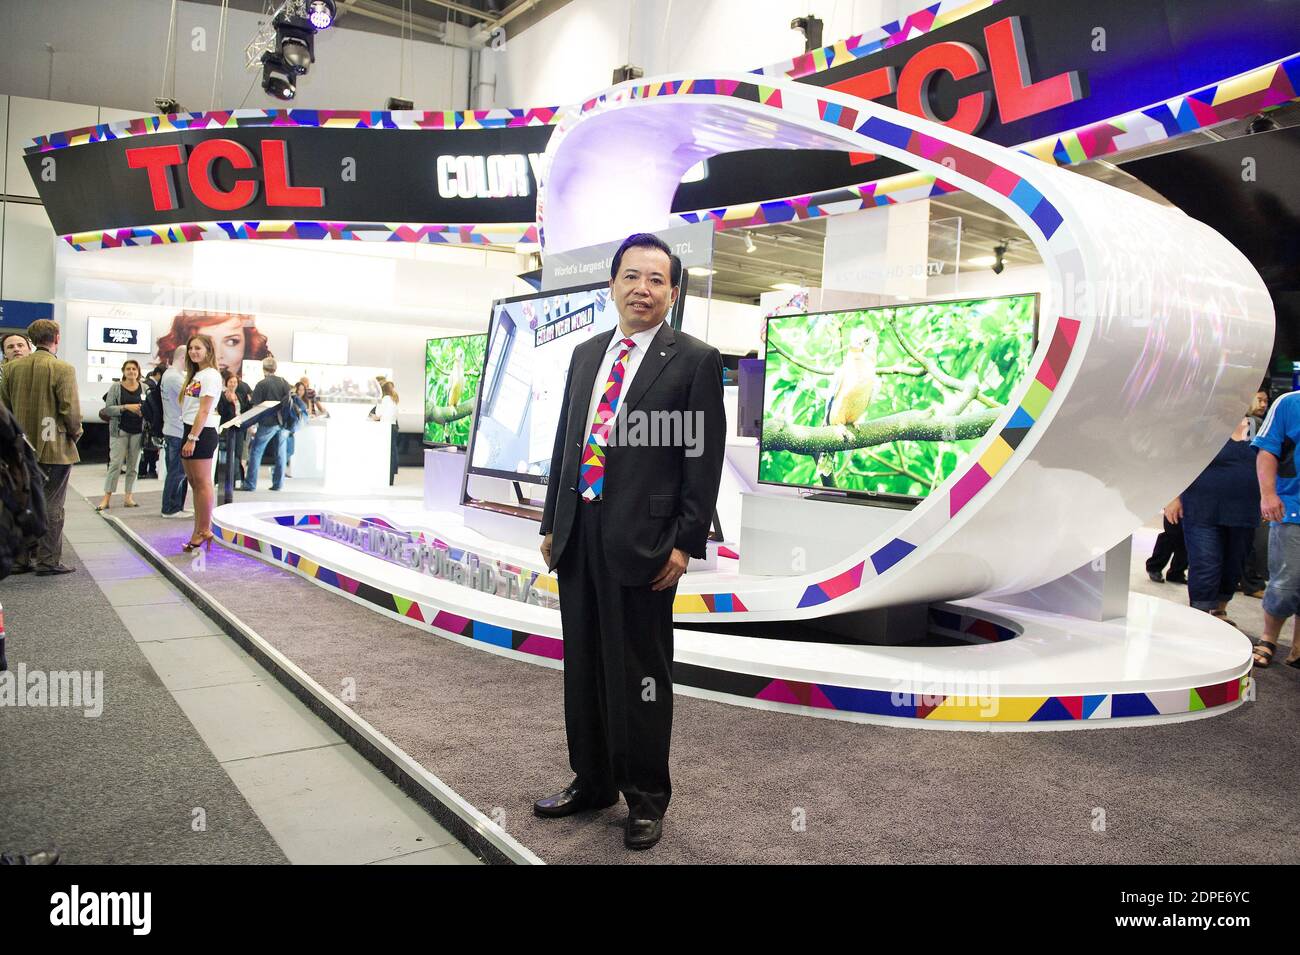 Chinese businessman, Li Dongsheng, chairman of TCL Corp poses during the 2013 IFA home electronics and appliances trade fair, on September 06, 2013, in Berlin, Germany, Photo by David Niviere/ABACAPRESS.COM Stock Photo